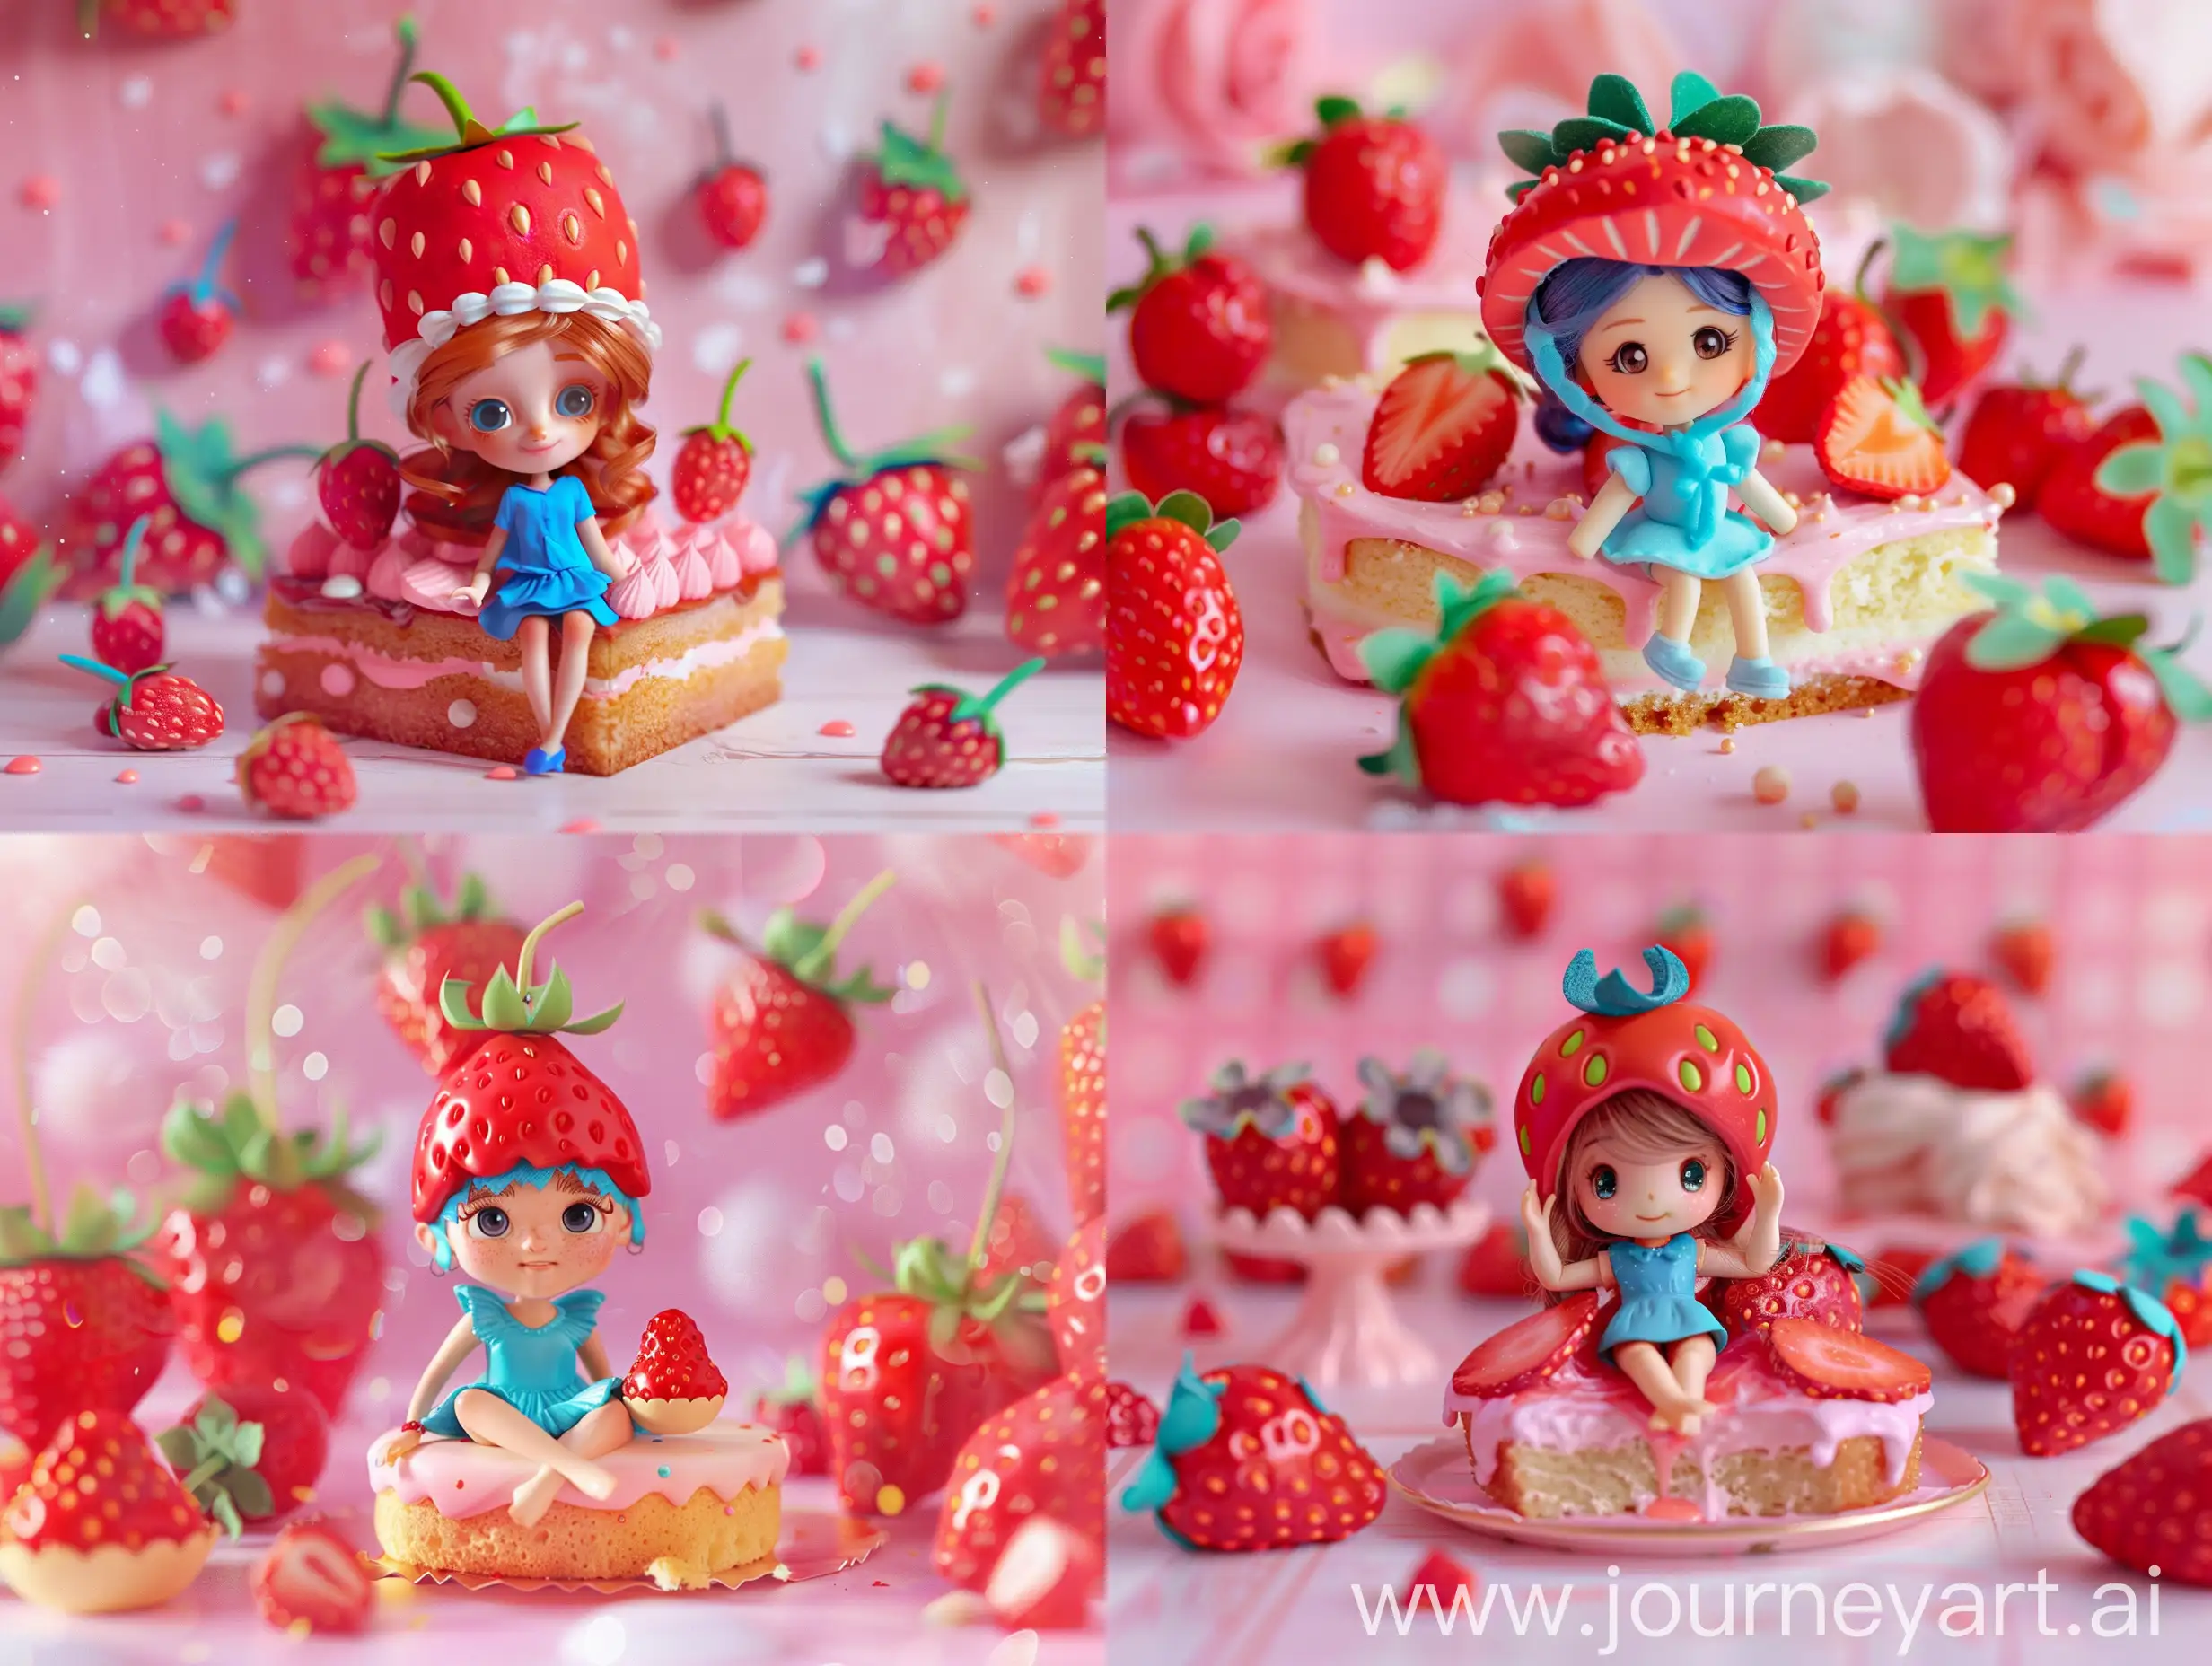 Girl, she has a strawberry-shaped hat on her head, wears blue, she sits on a piece of cake. Background pink and with strawberries